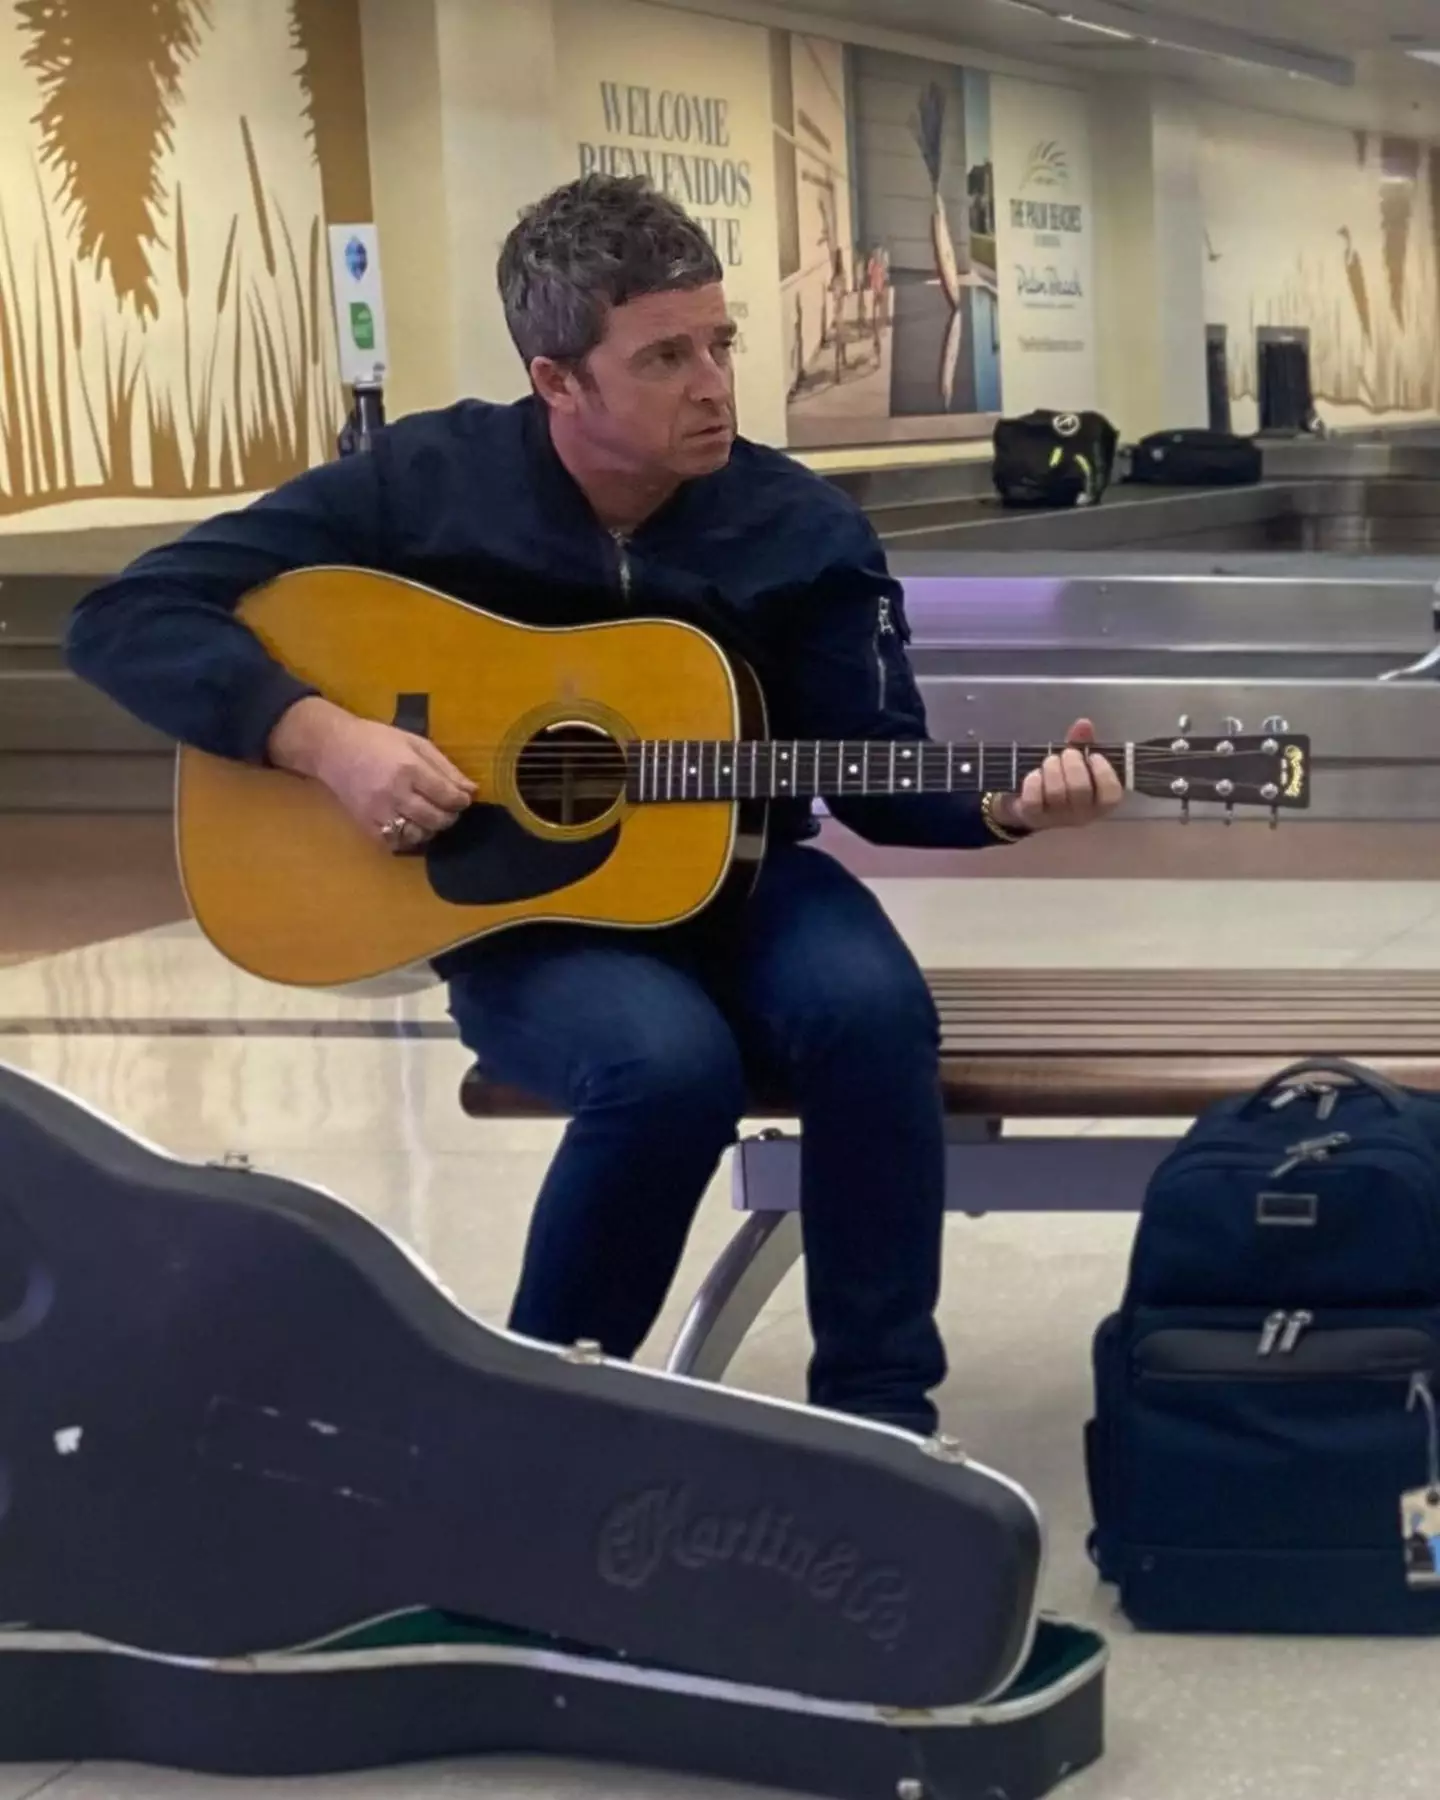 Noel Gallagher got out his guitar for a performance at Palm Beach airport.